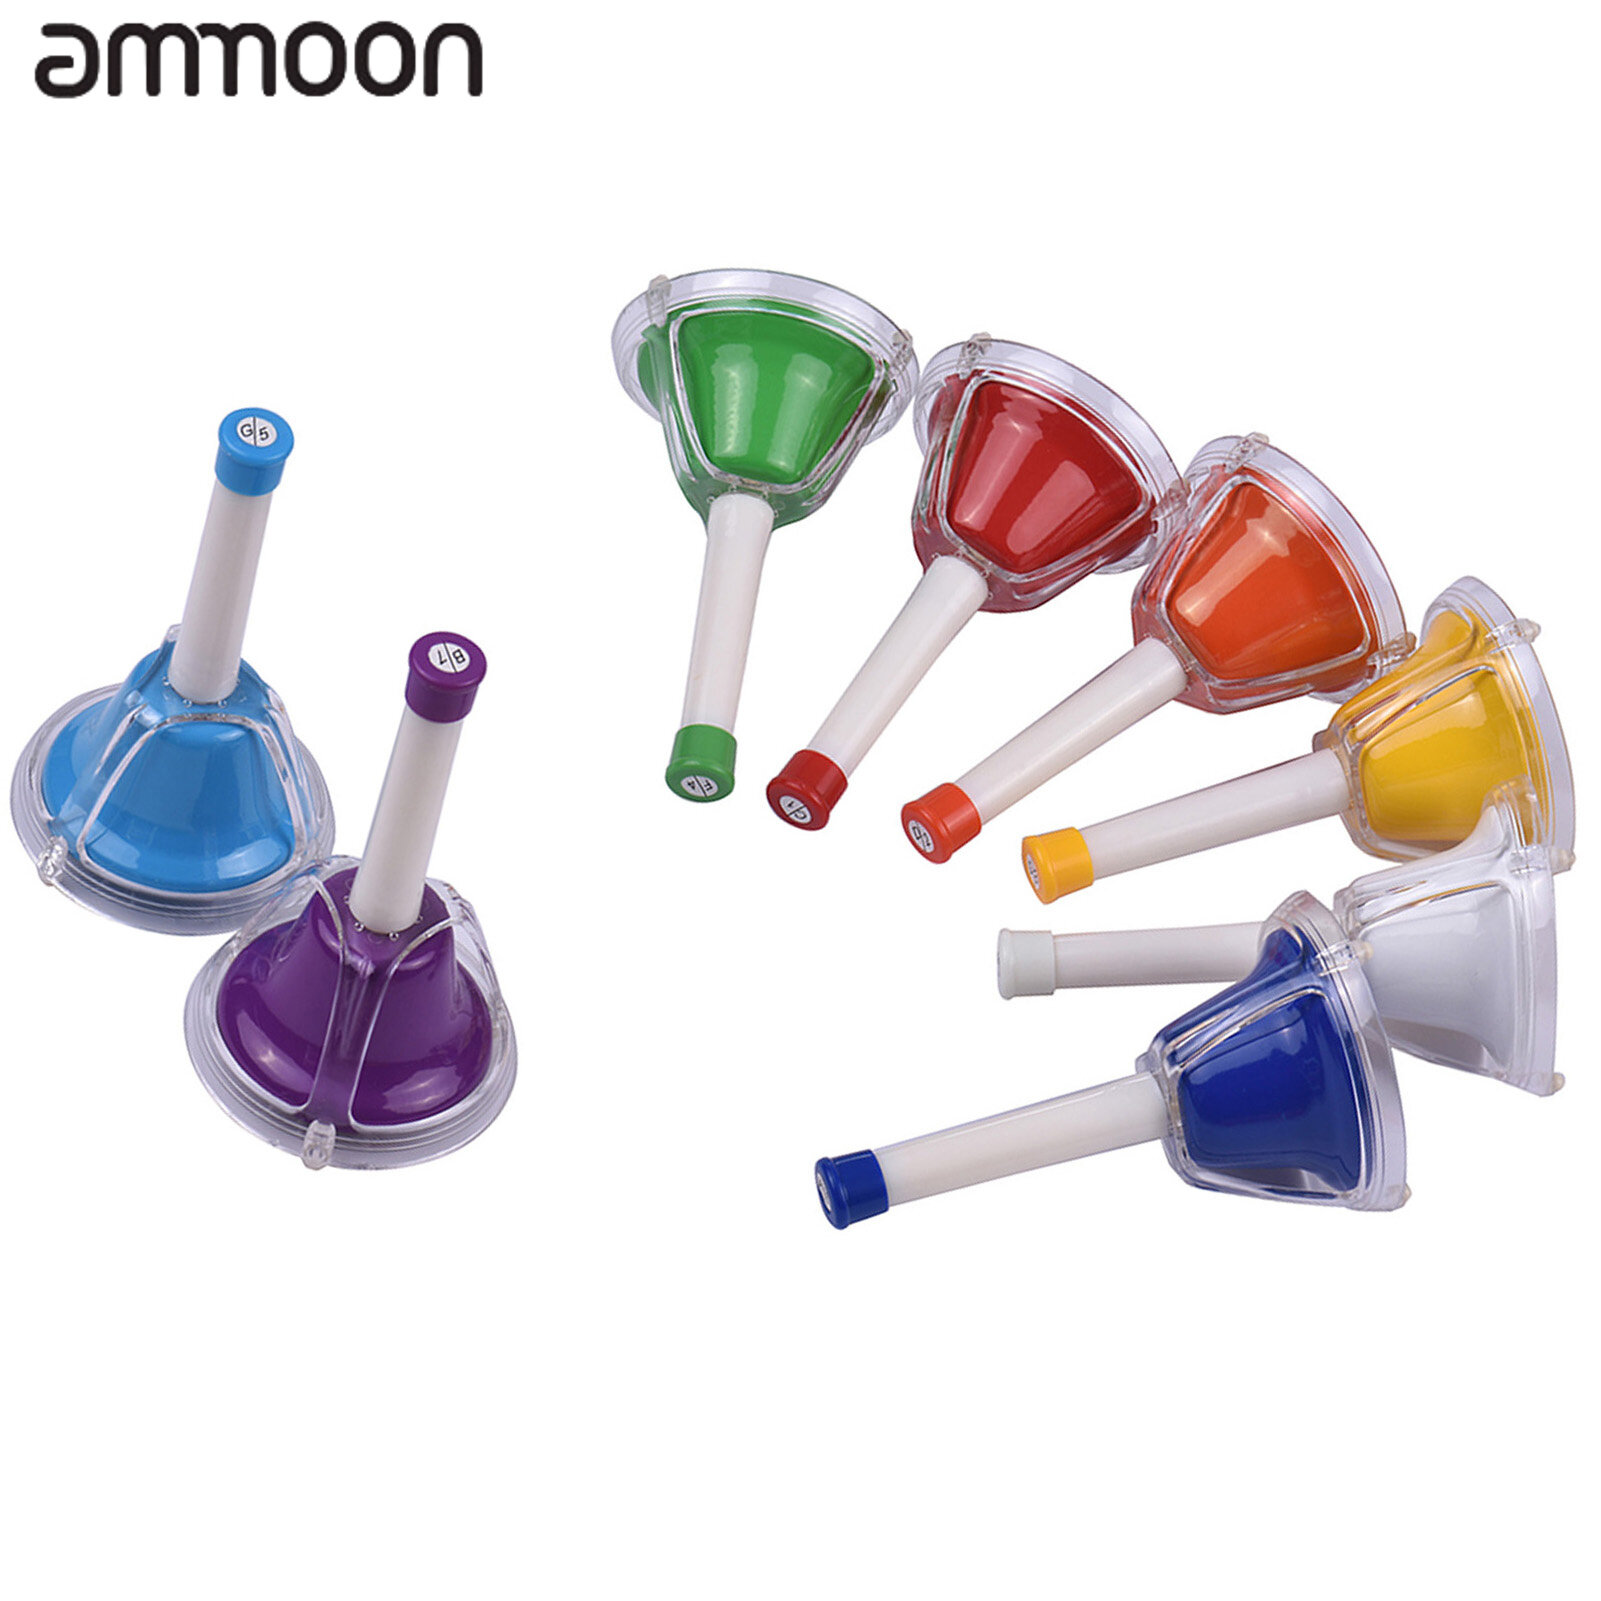 Handbell Set 8 Note Diatonic Metal Bells Musical Bells for Children Colorful Hand Percussion Bells for Toddlers Kids Musical Learning at an Early Age 